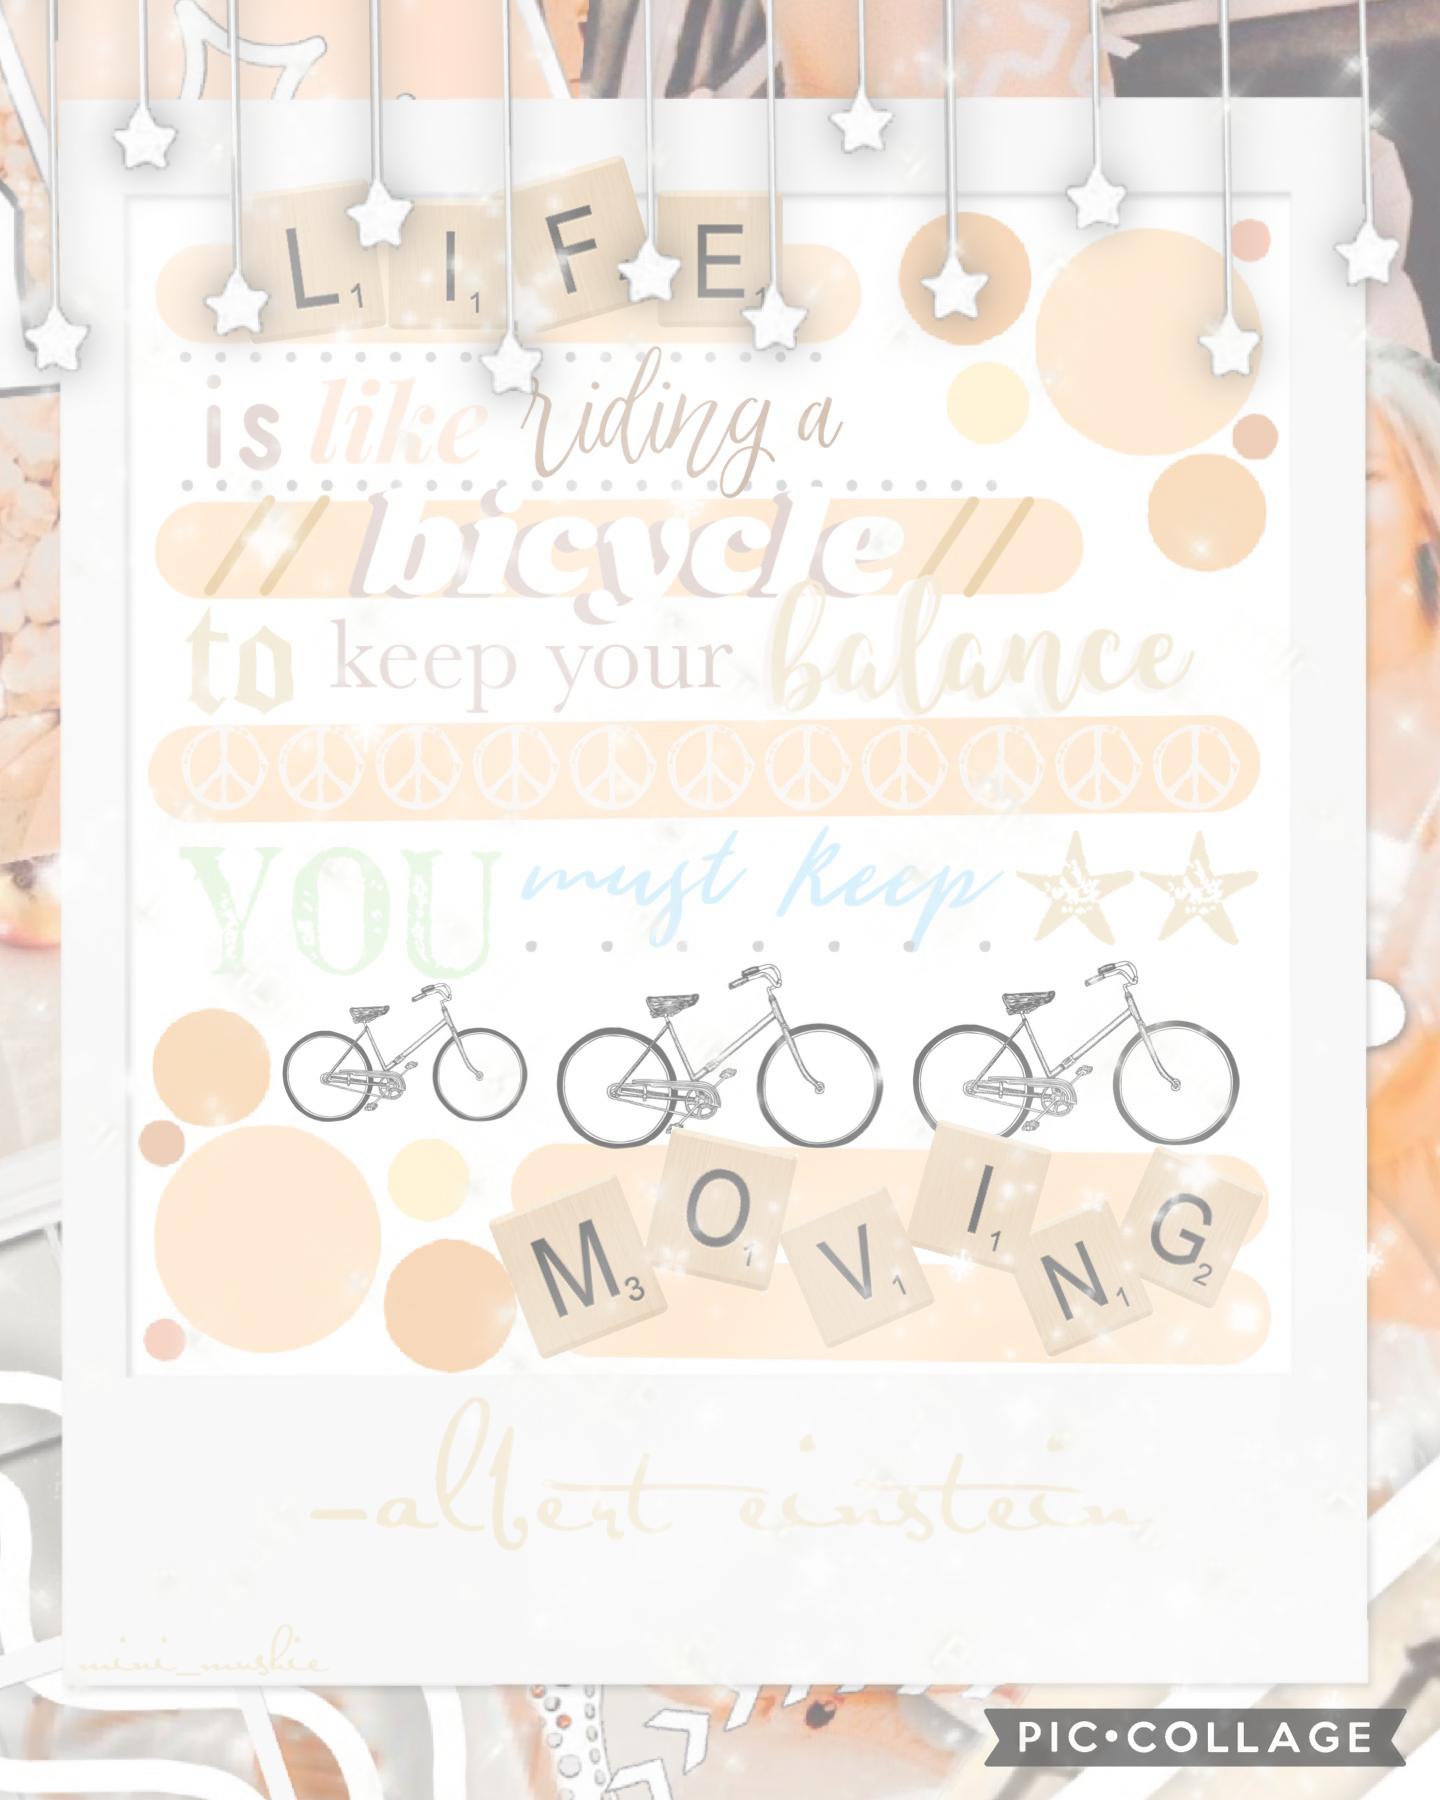 🙈tap!🙈
14-10-22-~life is like riding a bicycle, to keep your balance, you must keep moving~
qotd: fav drink?
aotd: boba🧋
im obsessed with scrabble letters now 🙊 i hope you like how i added bicycles! i love the results! rate out of 10? love you guys 🙉